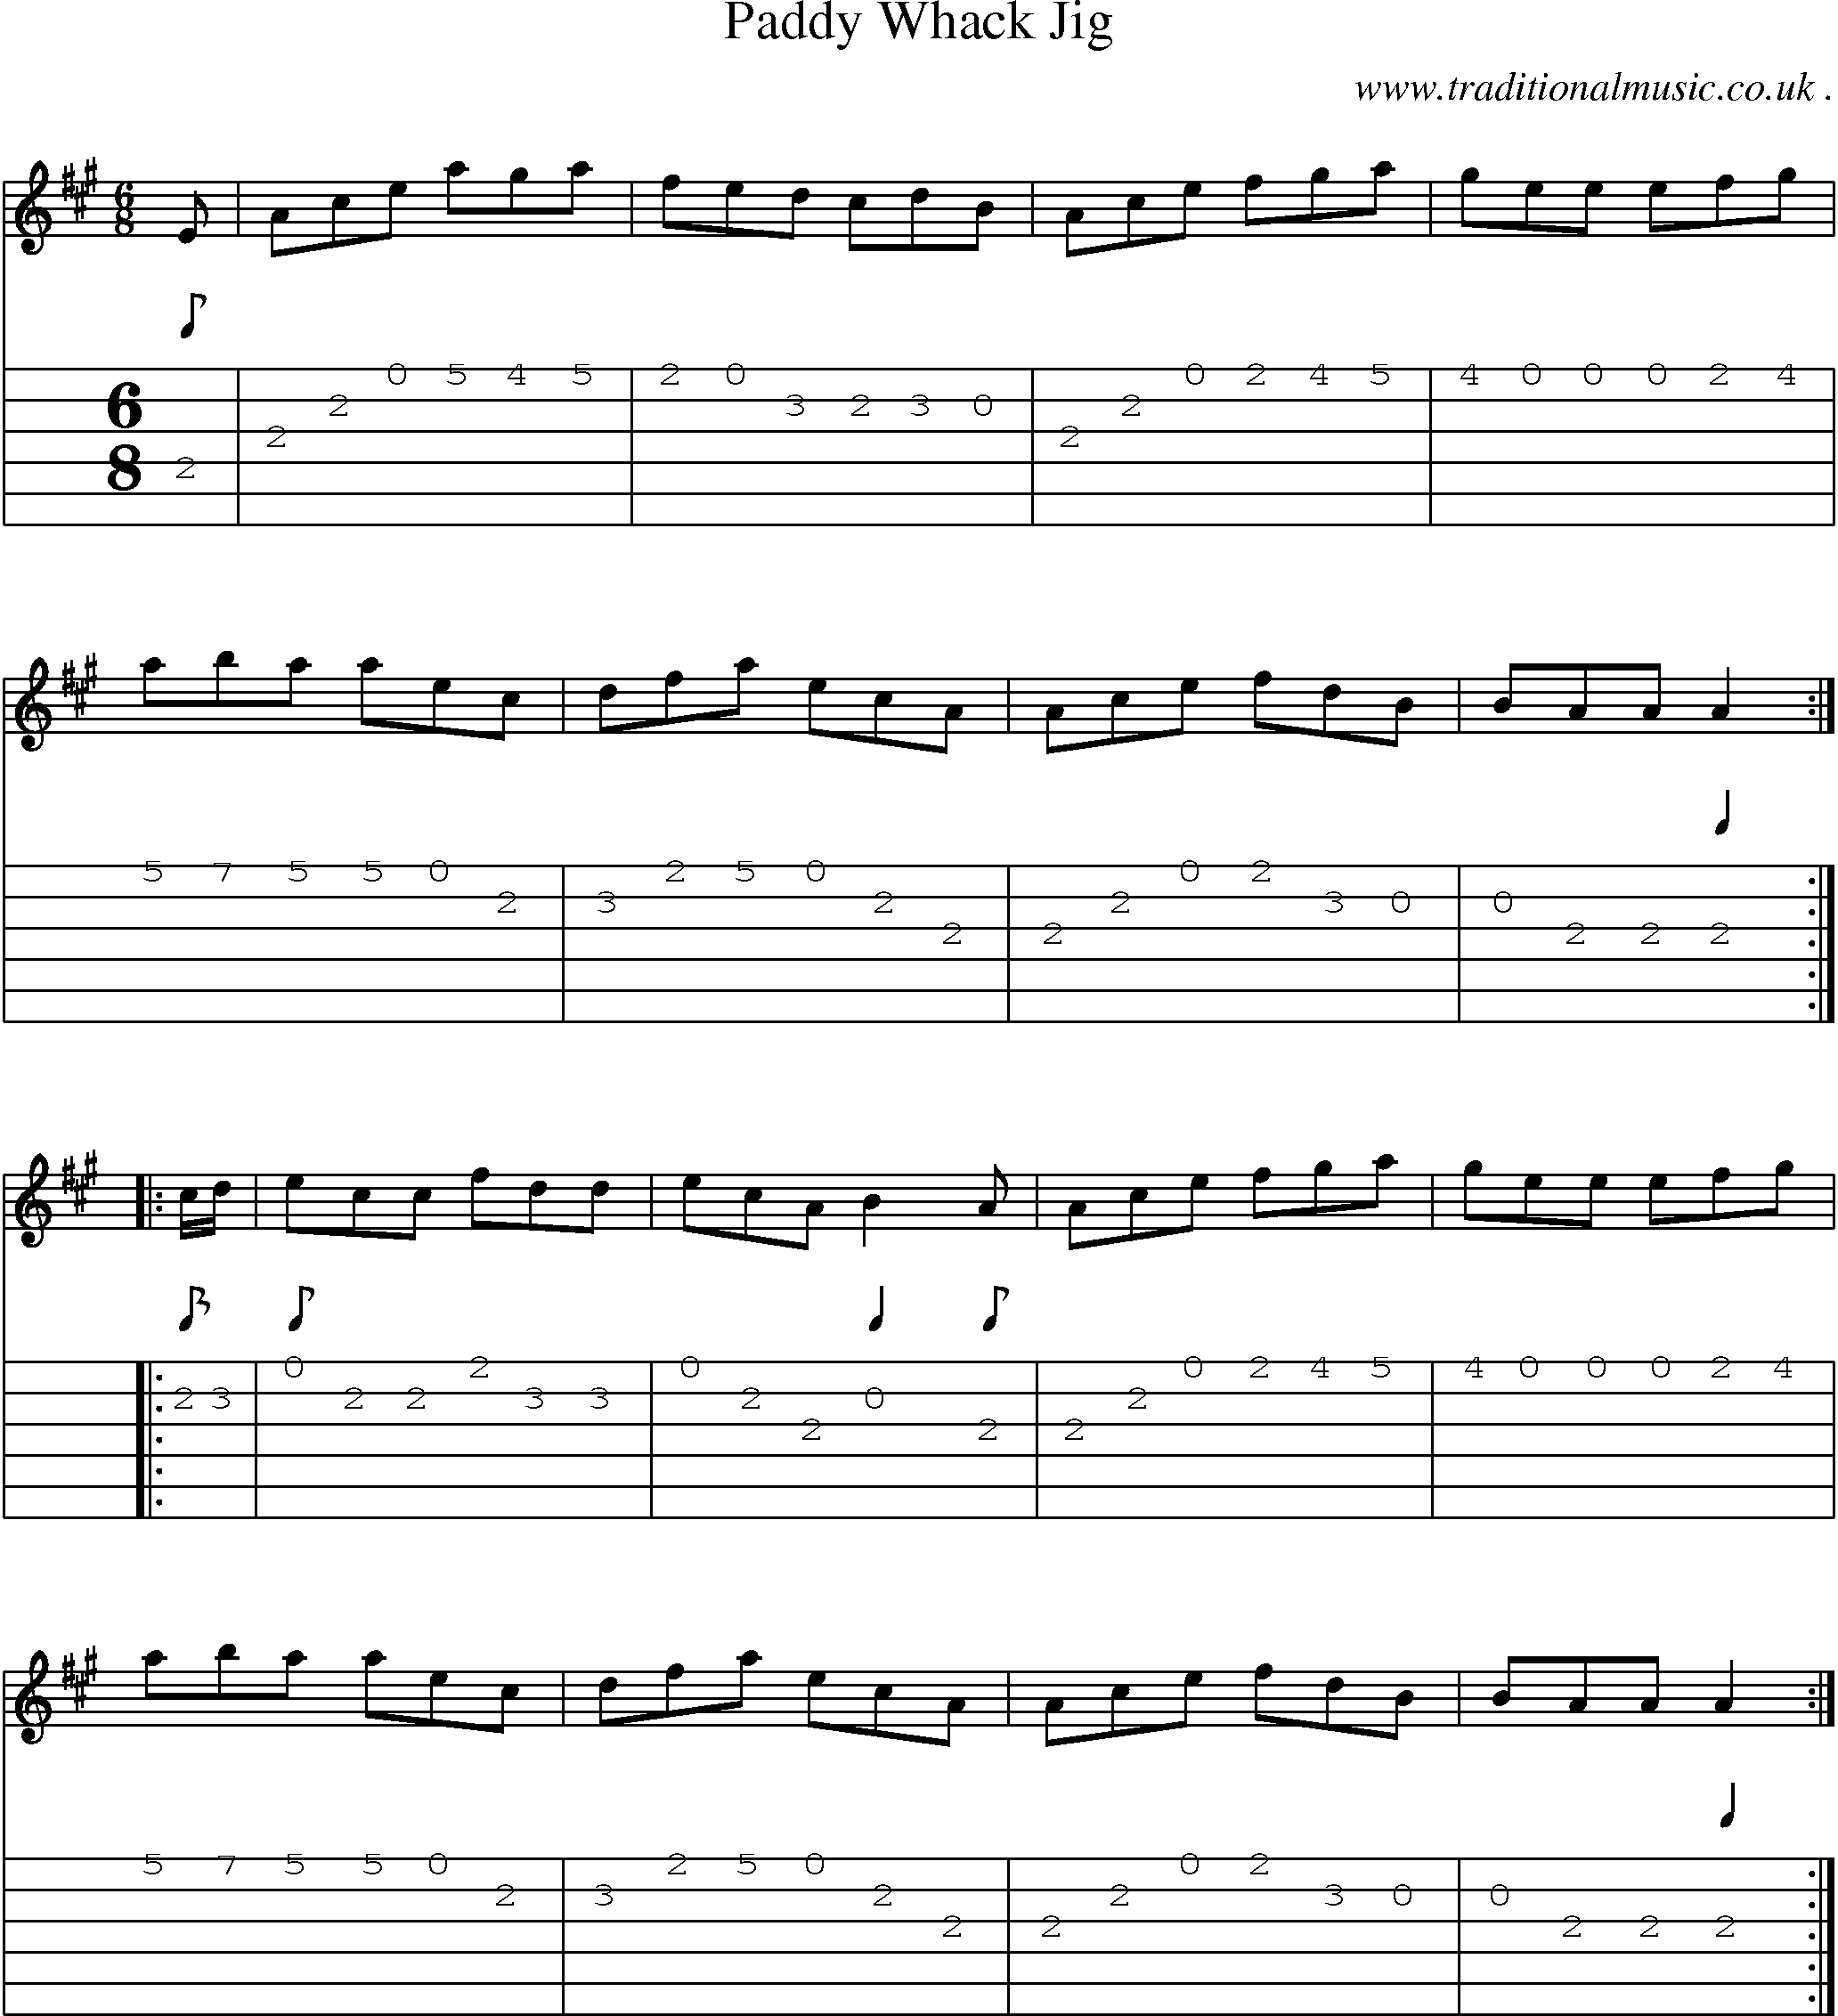 Sheet-Music and Guitar Tabs for Paddy Whack Jig